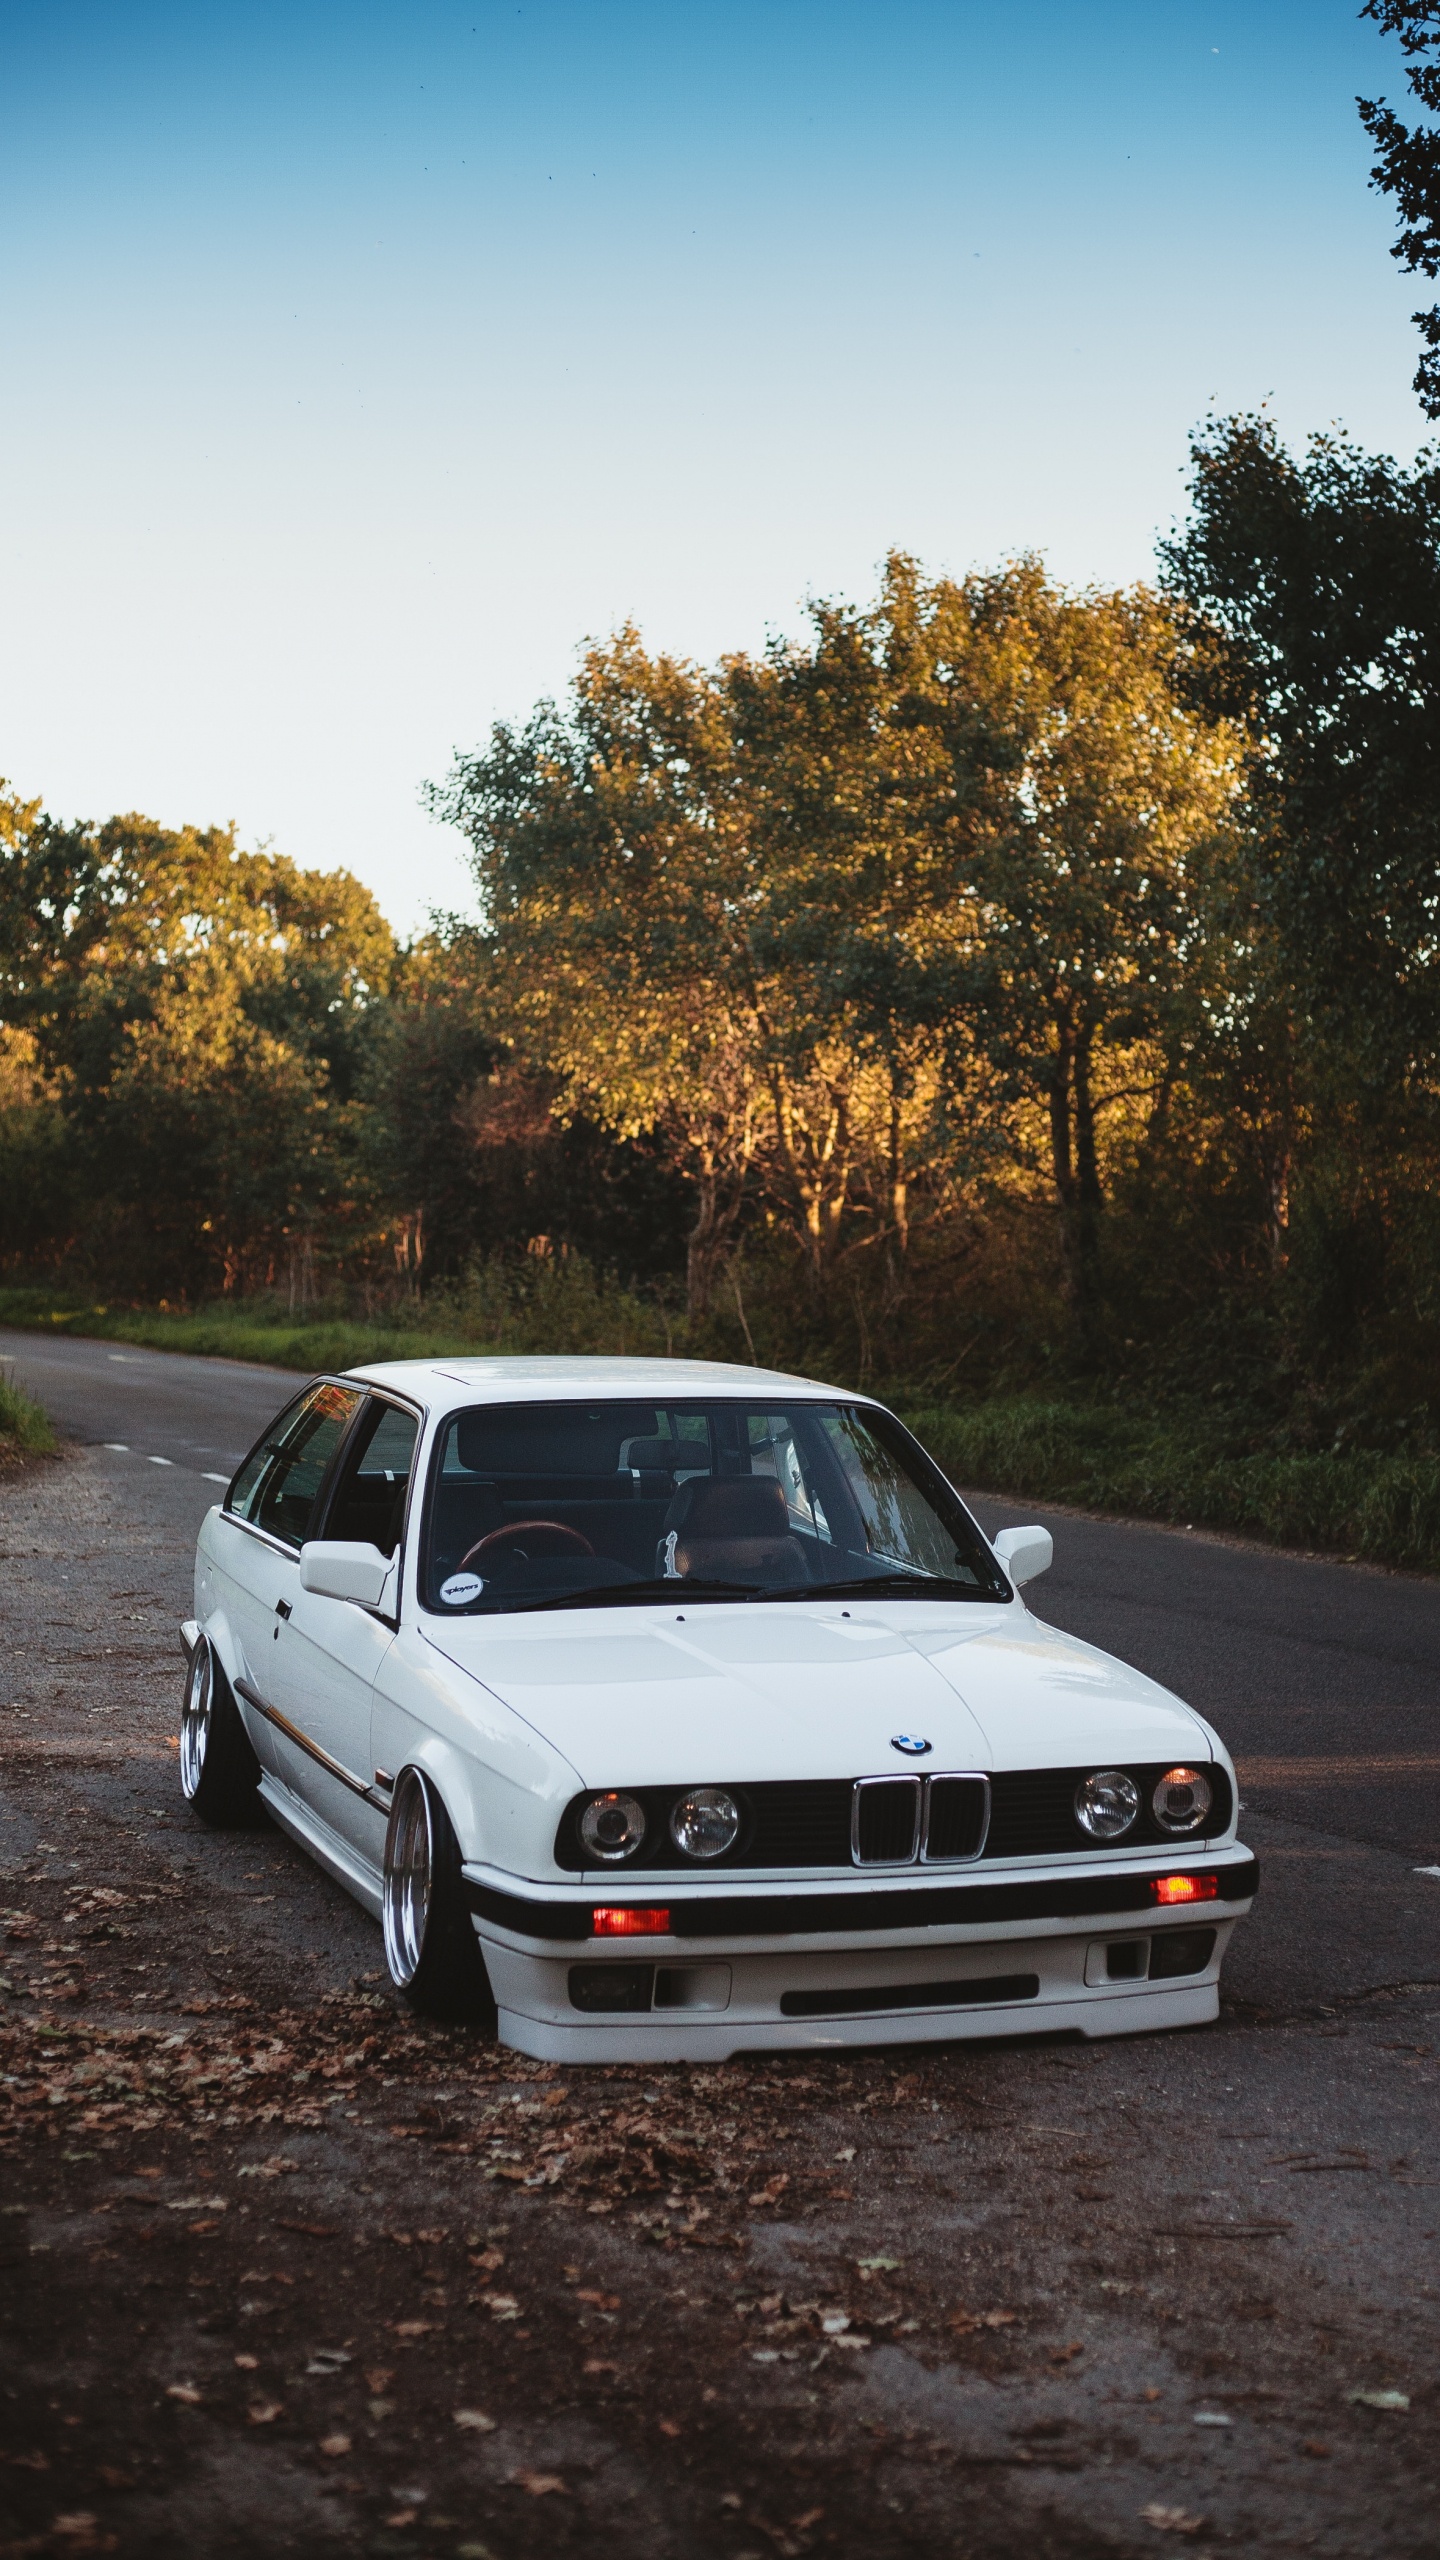 White Bmw m 3 on Road During Daytime. Wallpaper in 1440x2560 Resolution